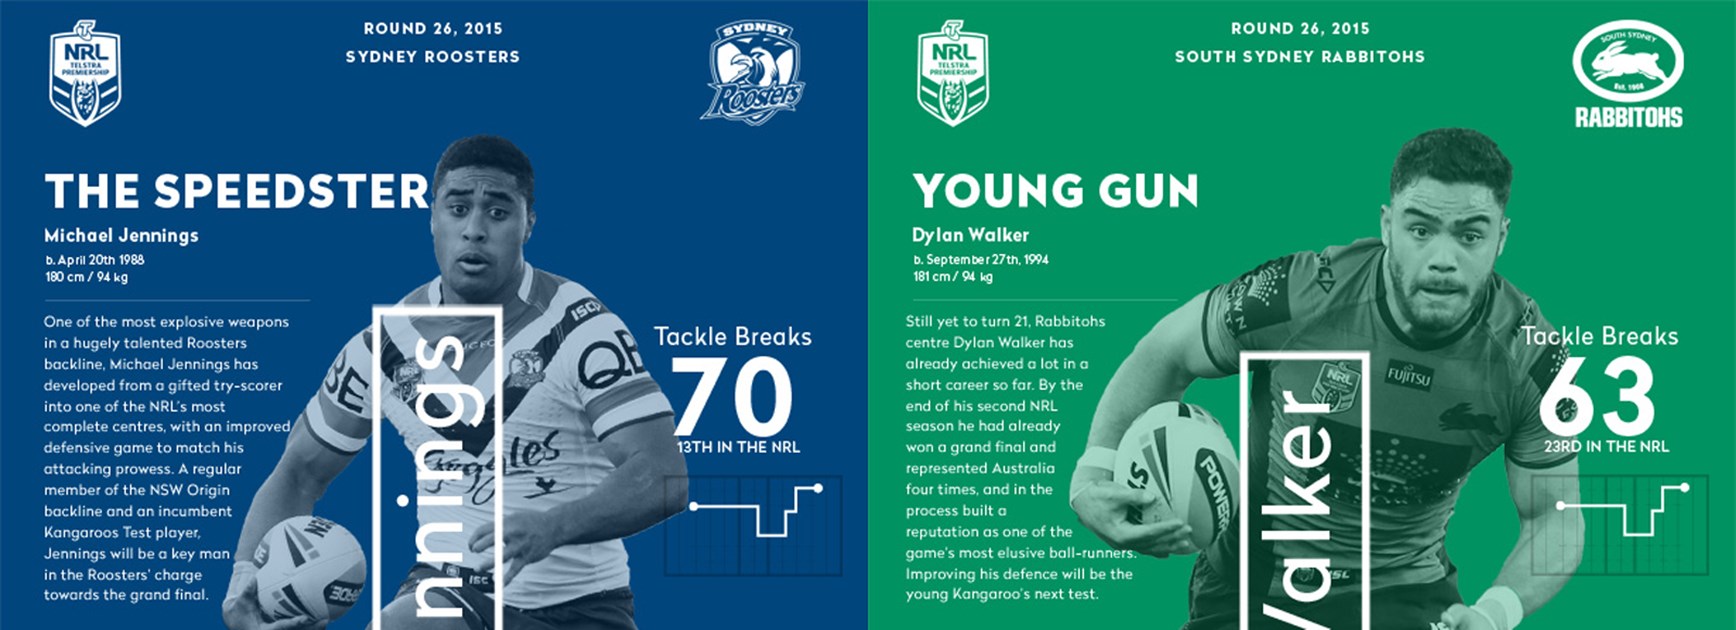 The Roosters and Rabbitohs will look to attacking weapons Michael Jennings and Dylan Walker in their Friday night clash.